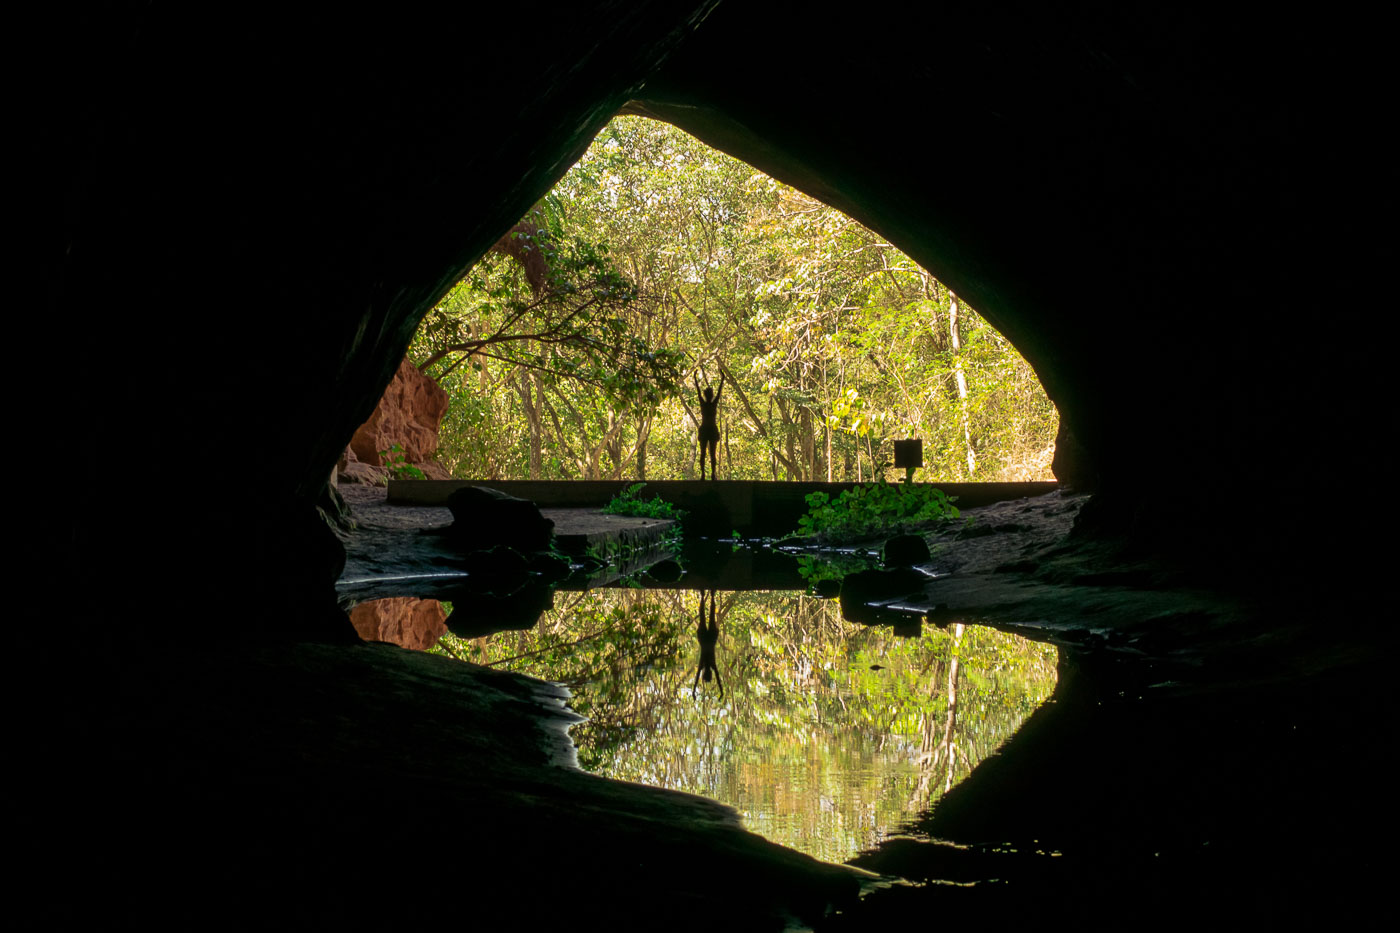 Inside the Itambé cave and Fernanda in the entrance with the pond reflecting the outside